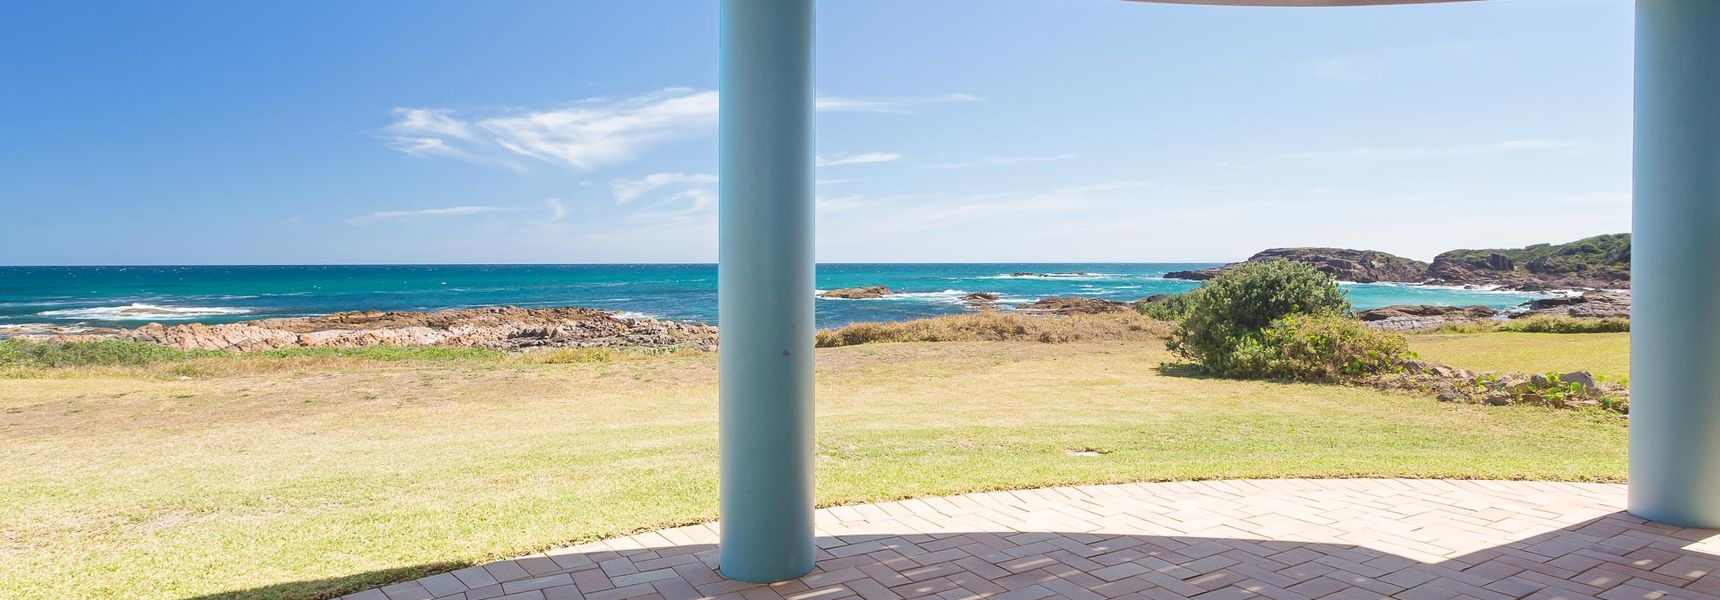 The Whale Watcher, 1/6 Birubi Lane – waterfront unit with stunning views, level access